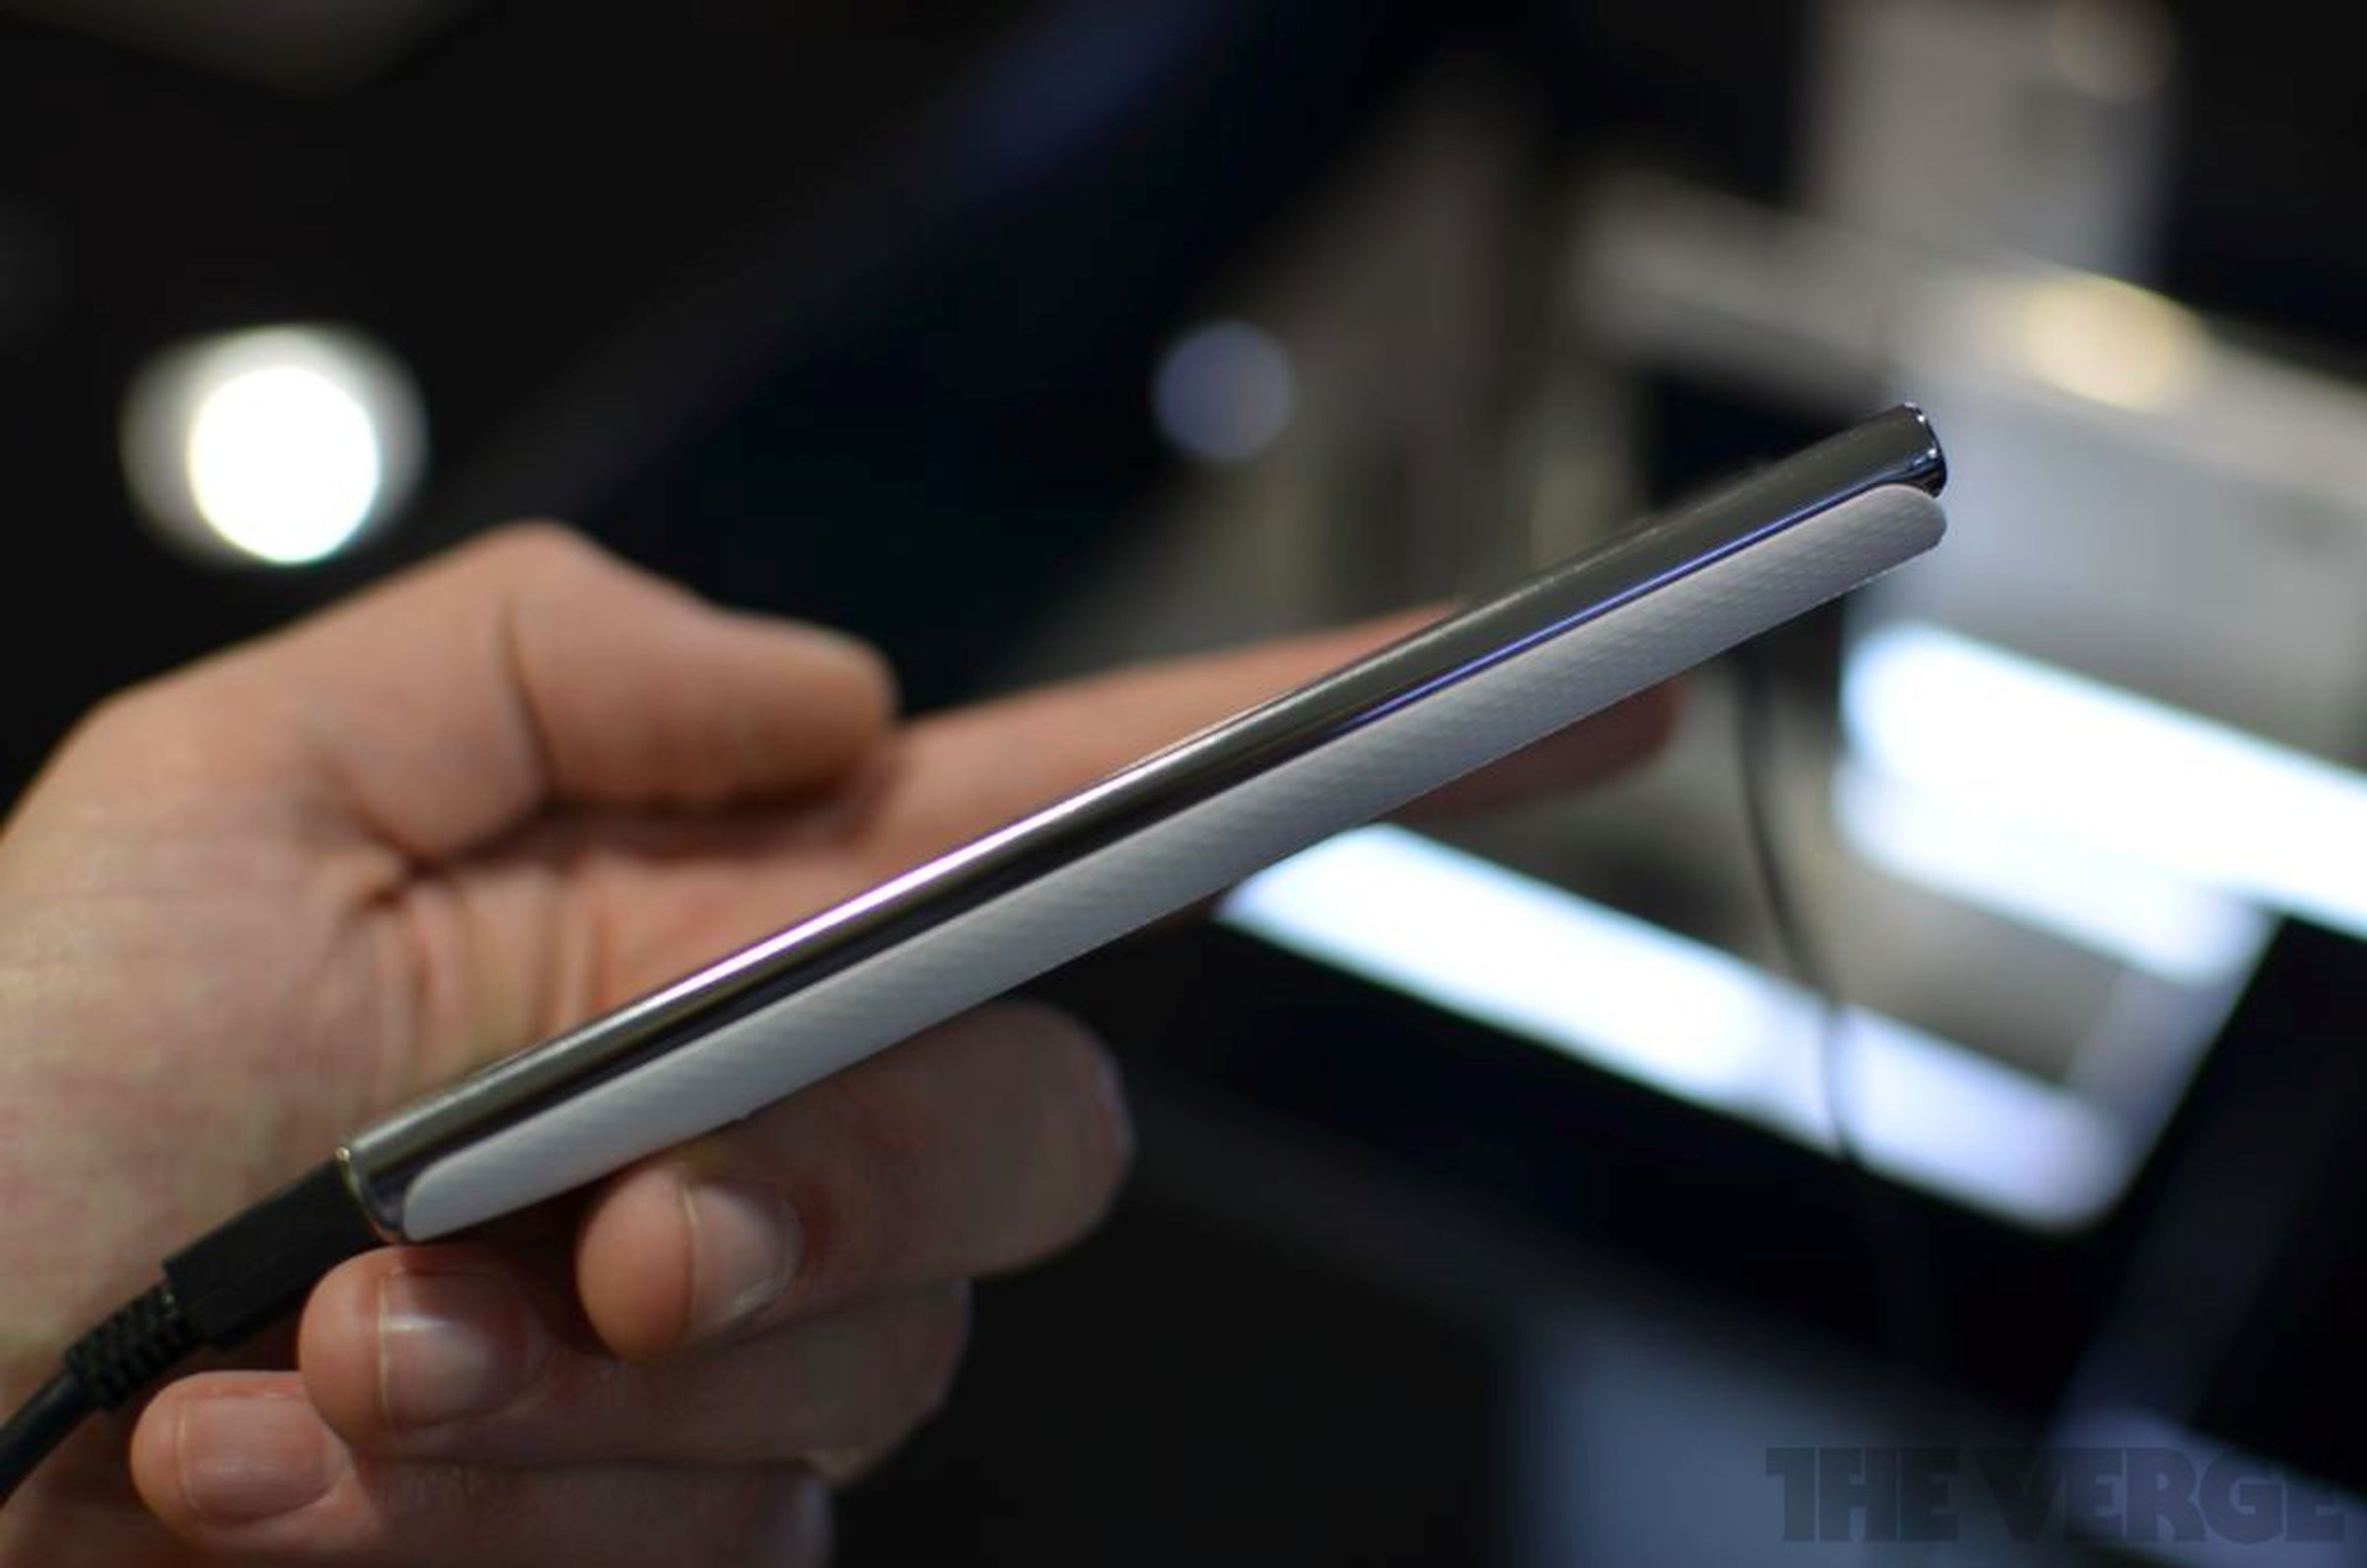 LG Optimus L7, L5, and L3 hands-on pictures